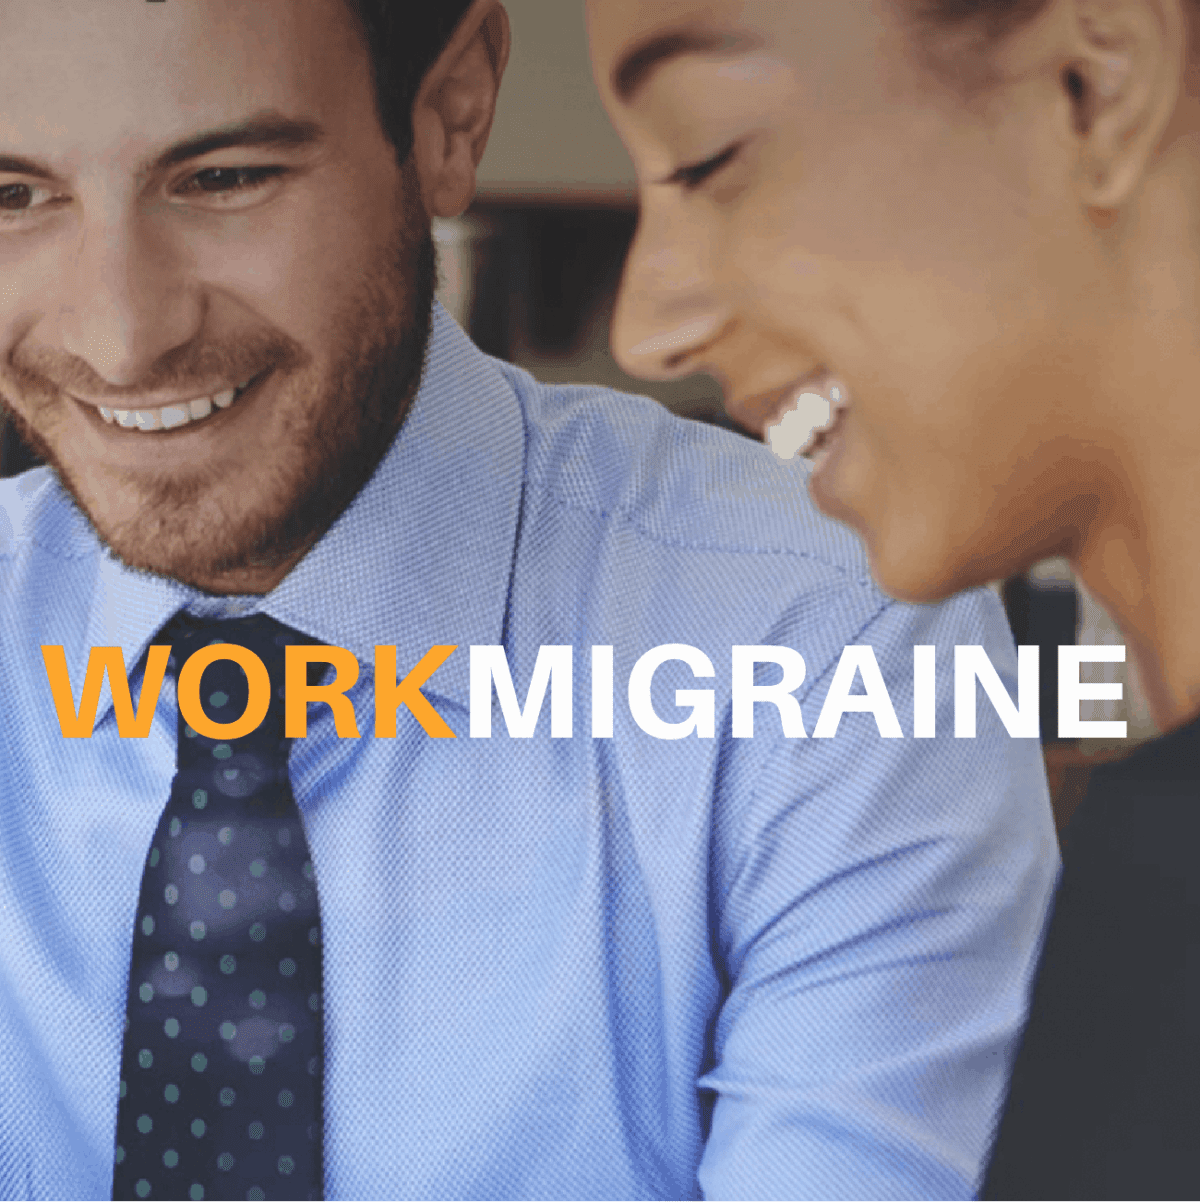 https://headaches.org/wp-content/uploads/2021/06/WORKMIGRAINE-IMAGE-1200x1203.png